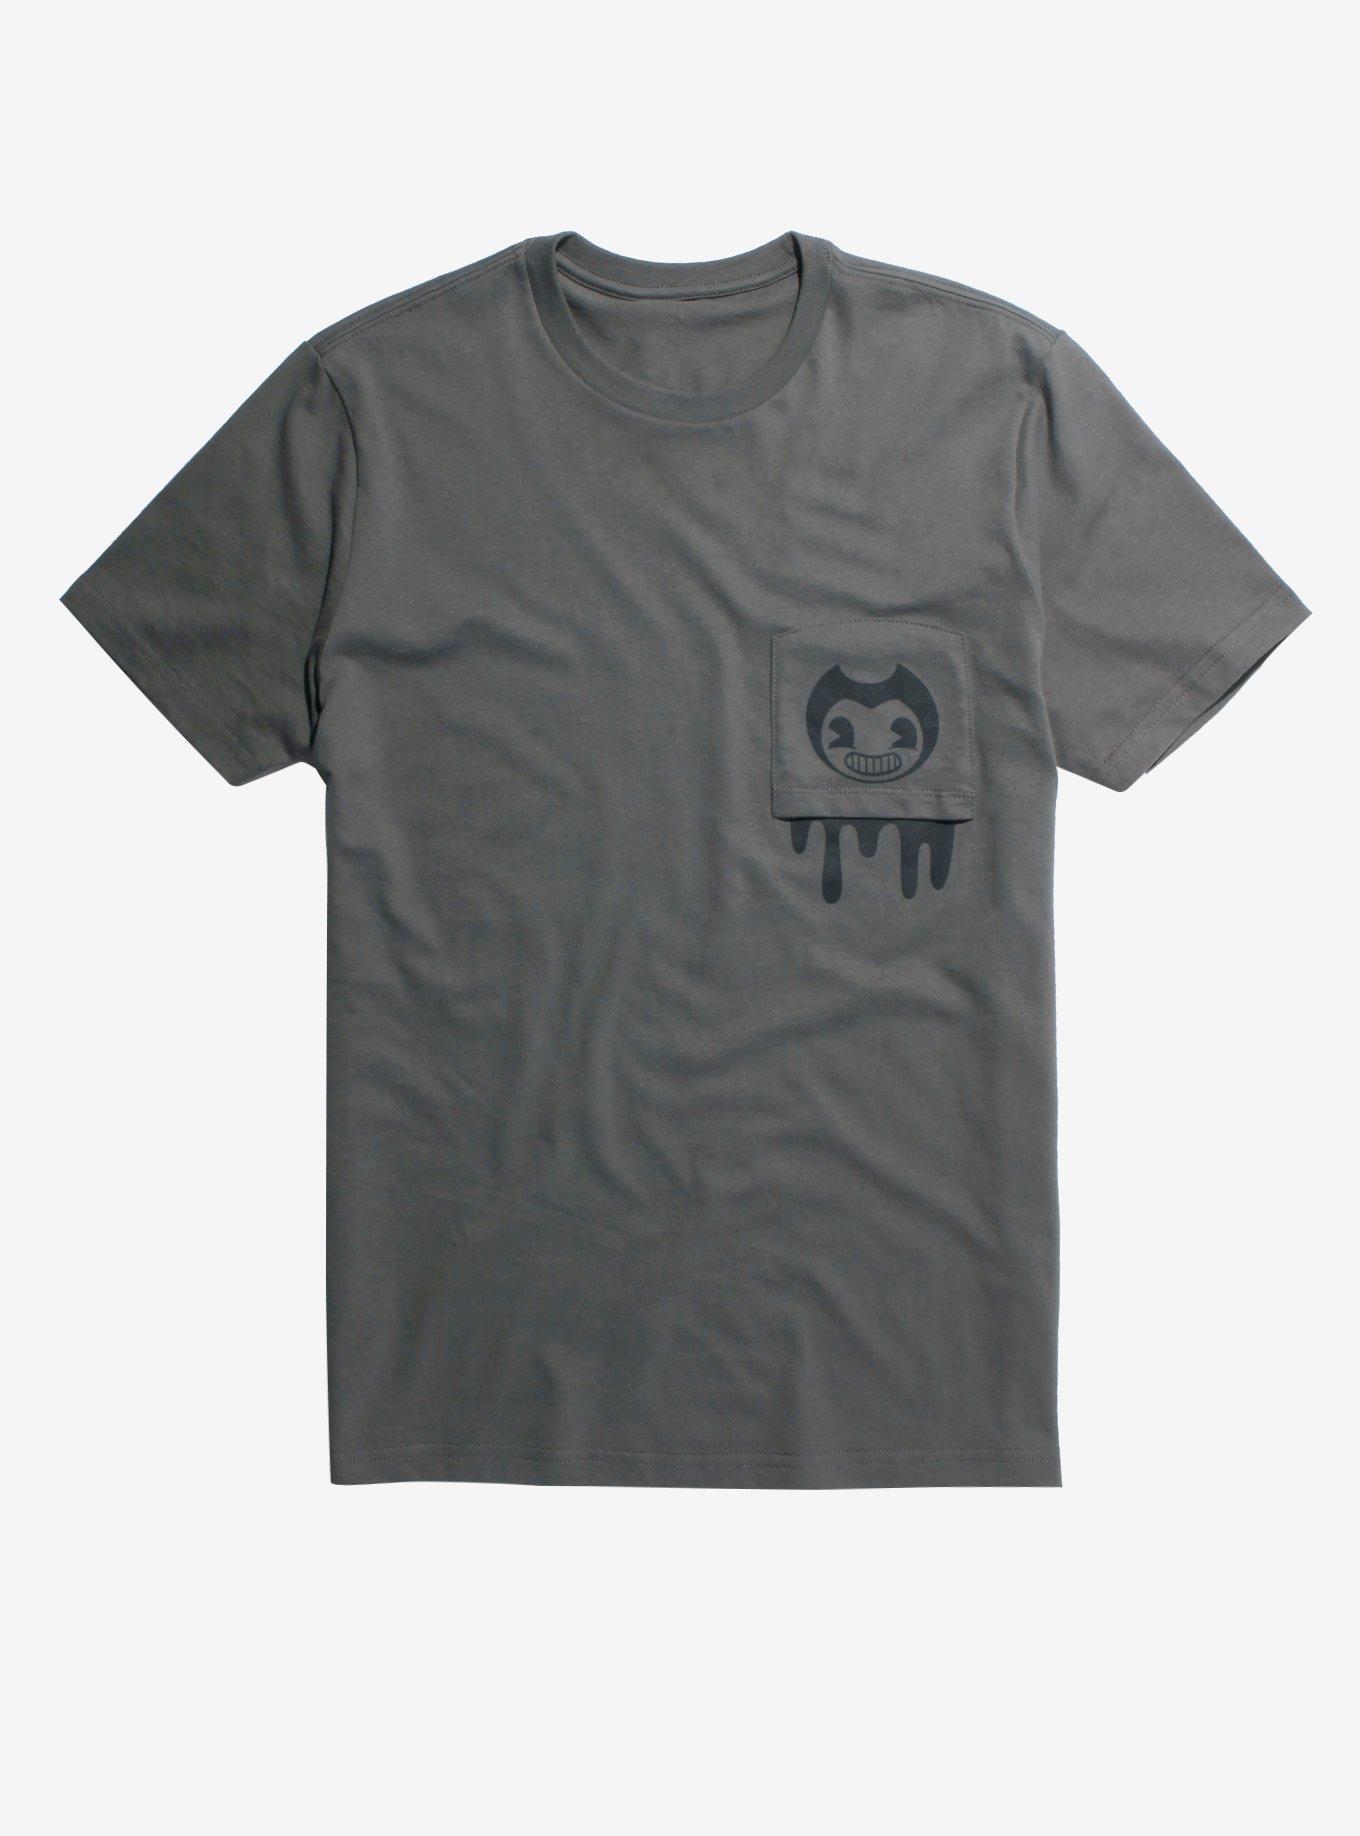 Bendy And The Ink Machine Pocket T-Shirt Hot Topic Exclusive, GREY, hi-res